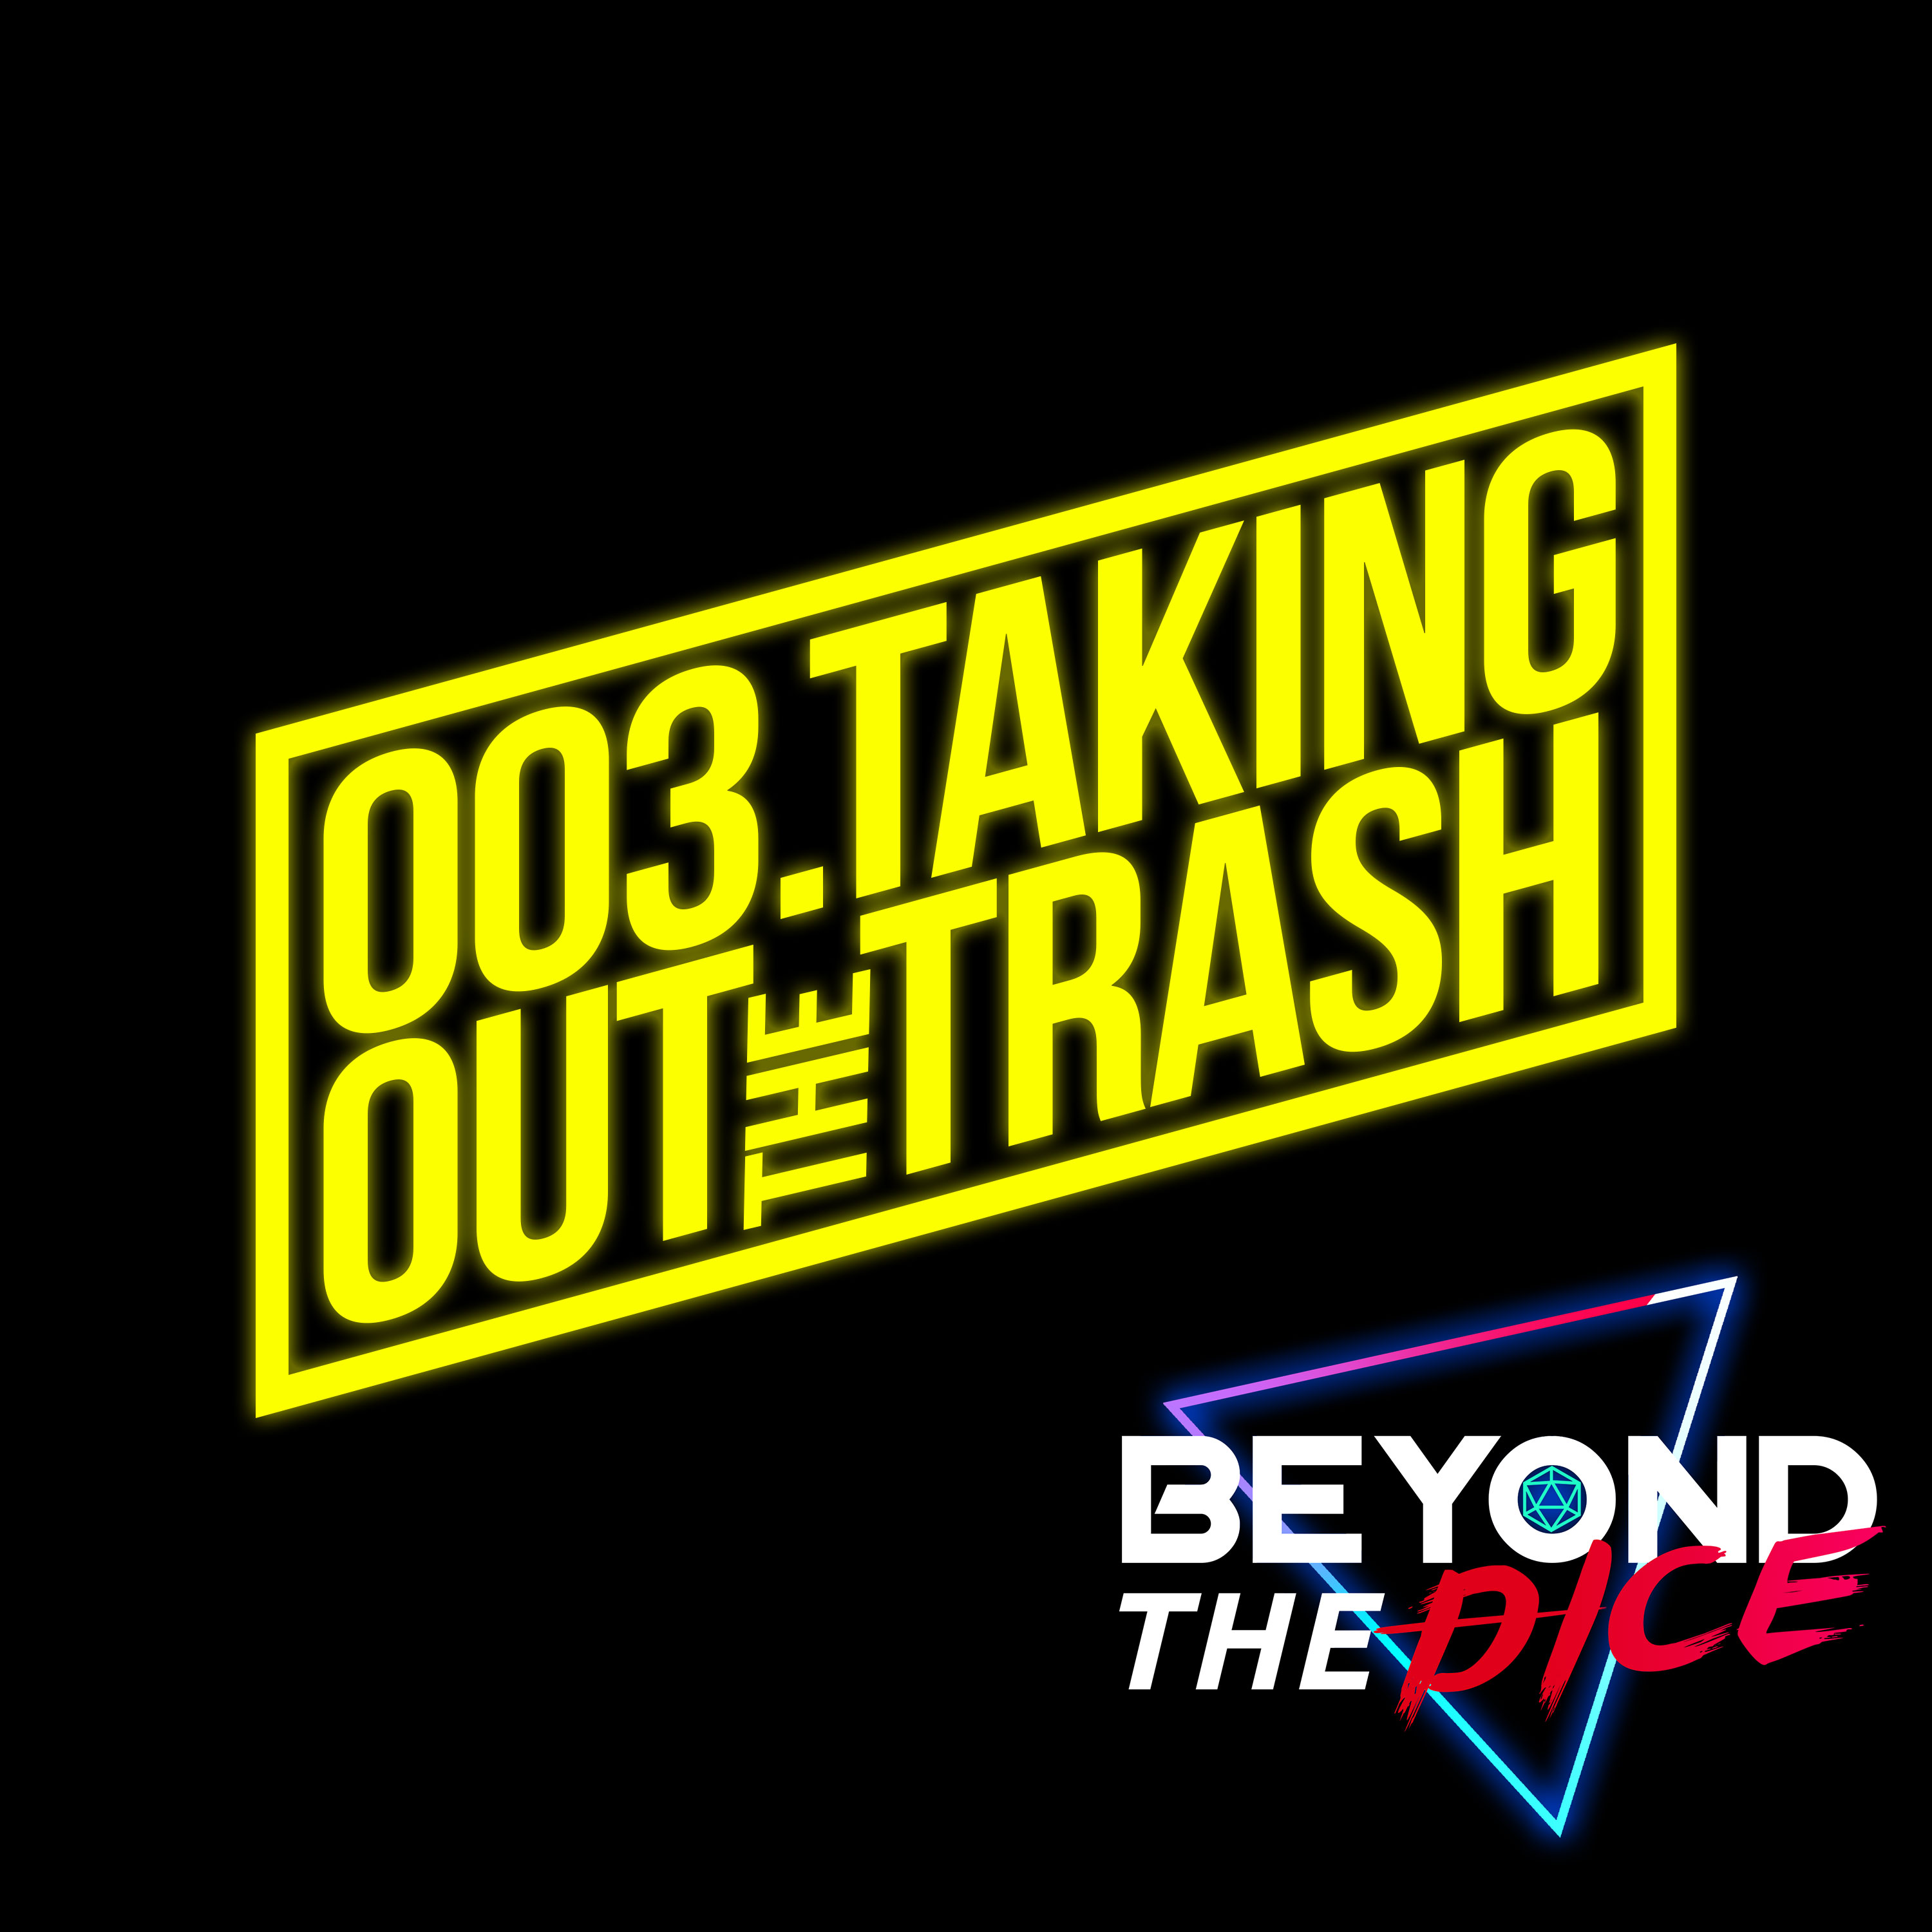 003.Taking Out The Trash